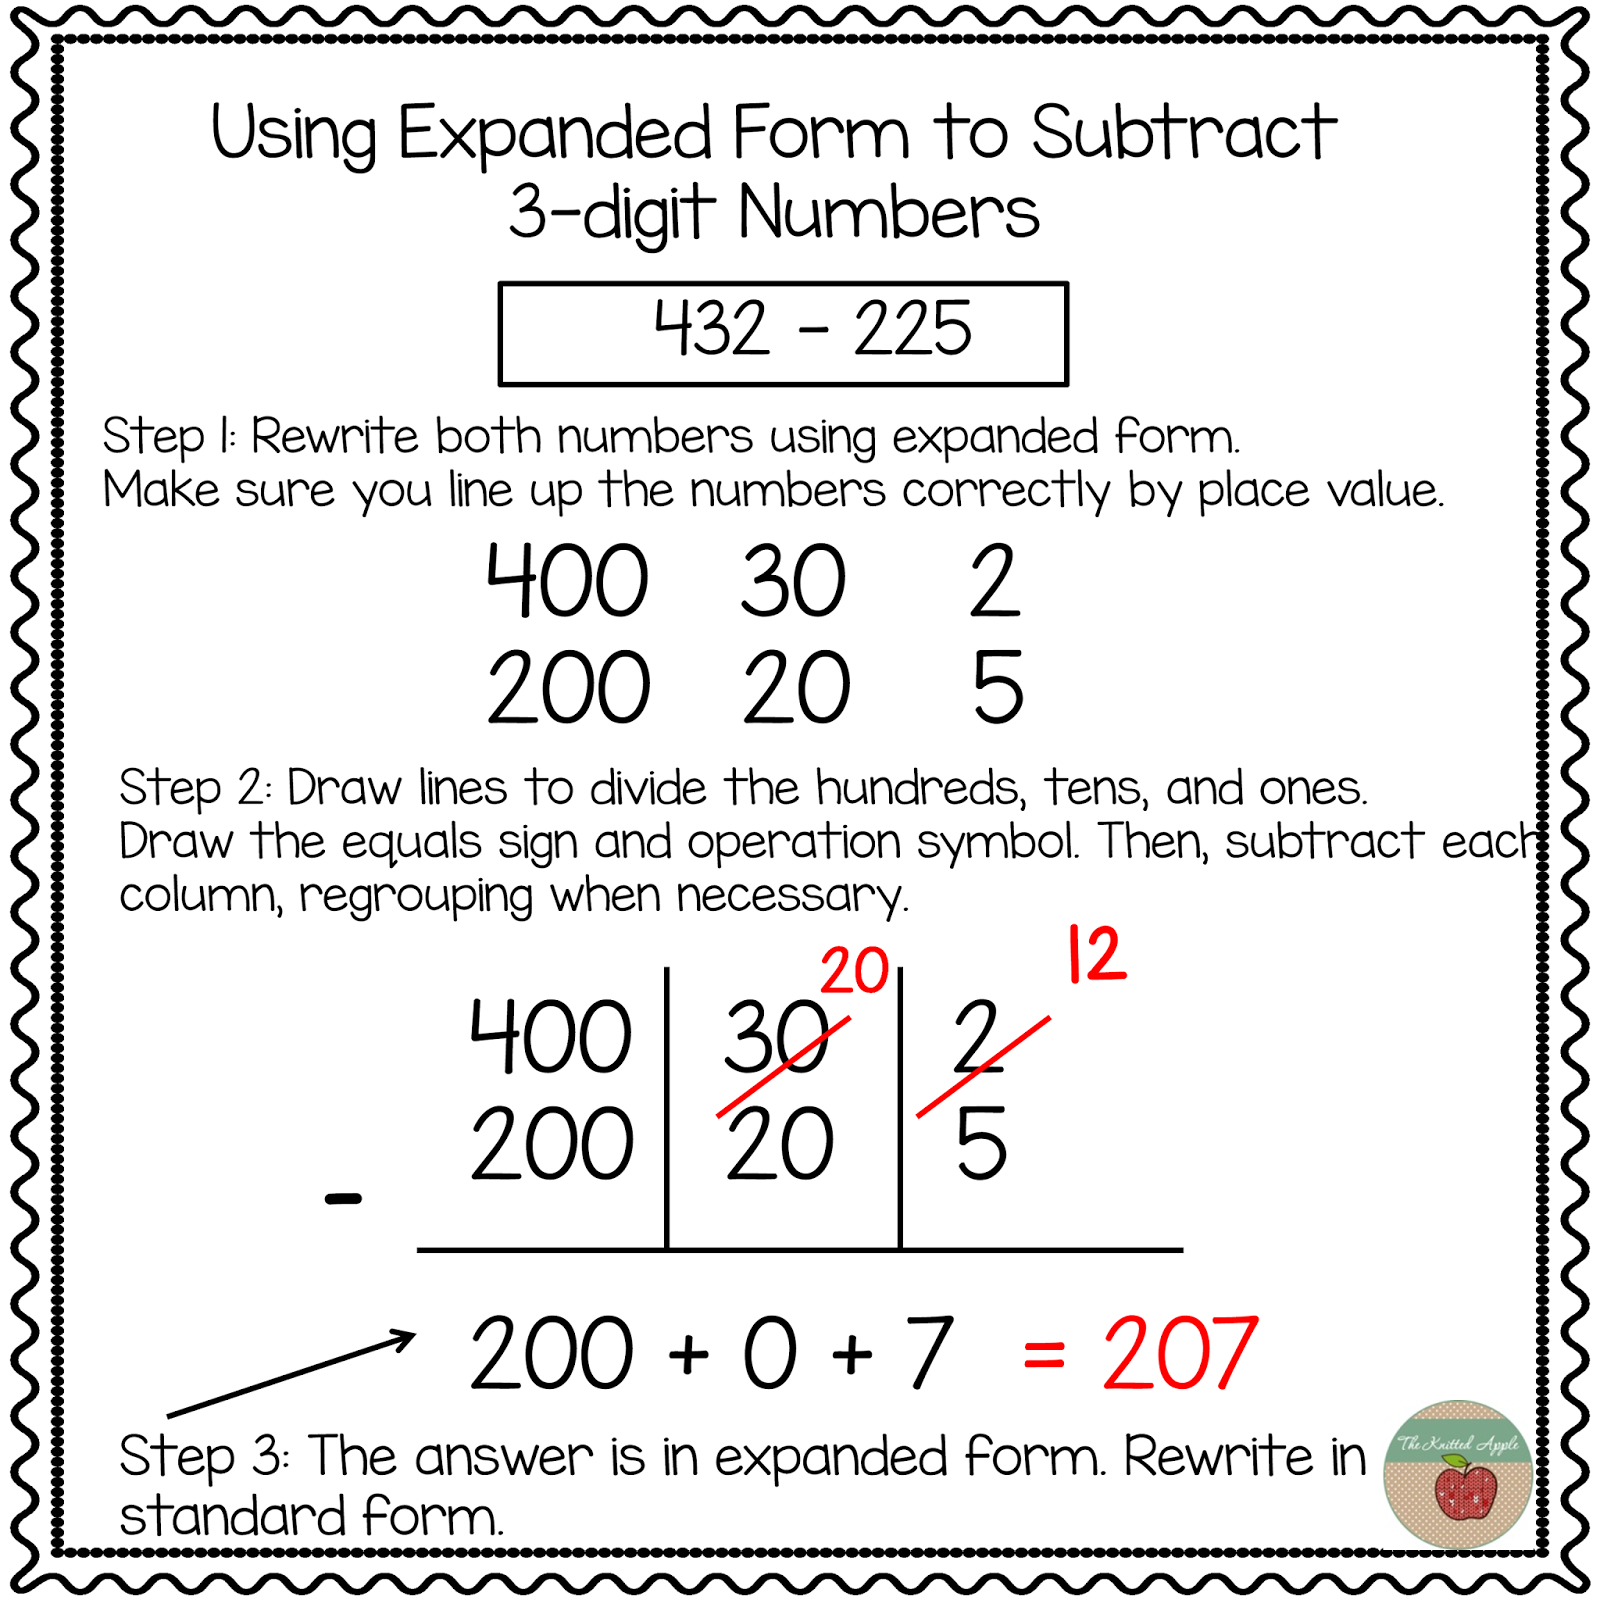 uses-the-expanded-form-to-explain-subtraction-with-regrouping-seven